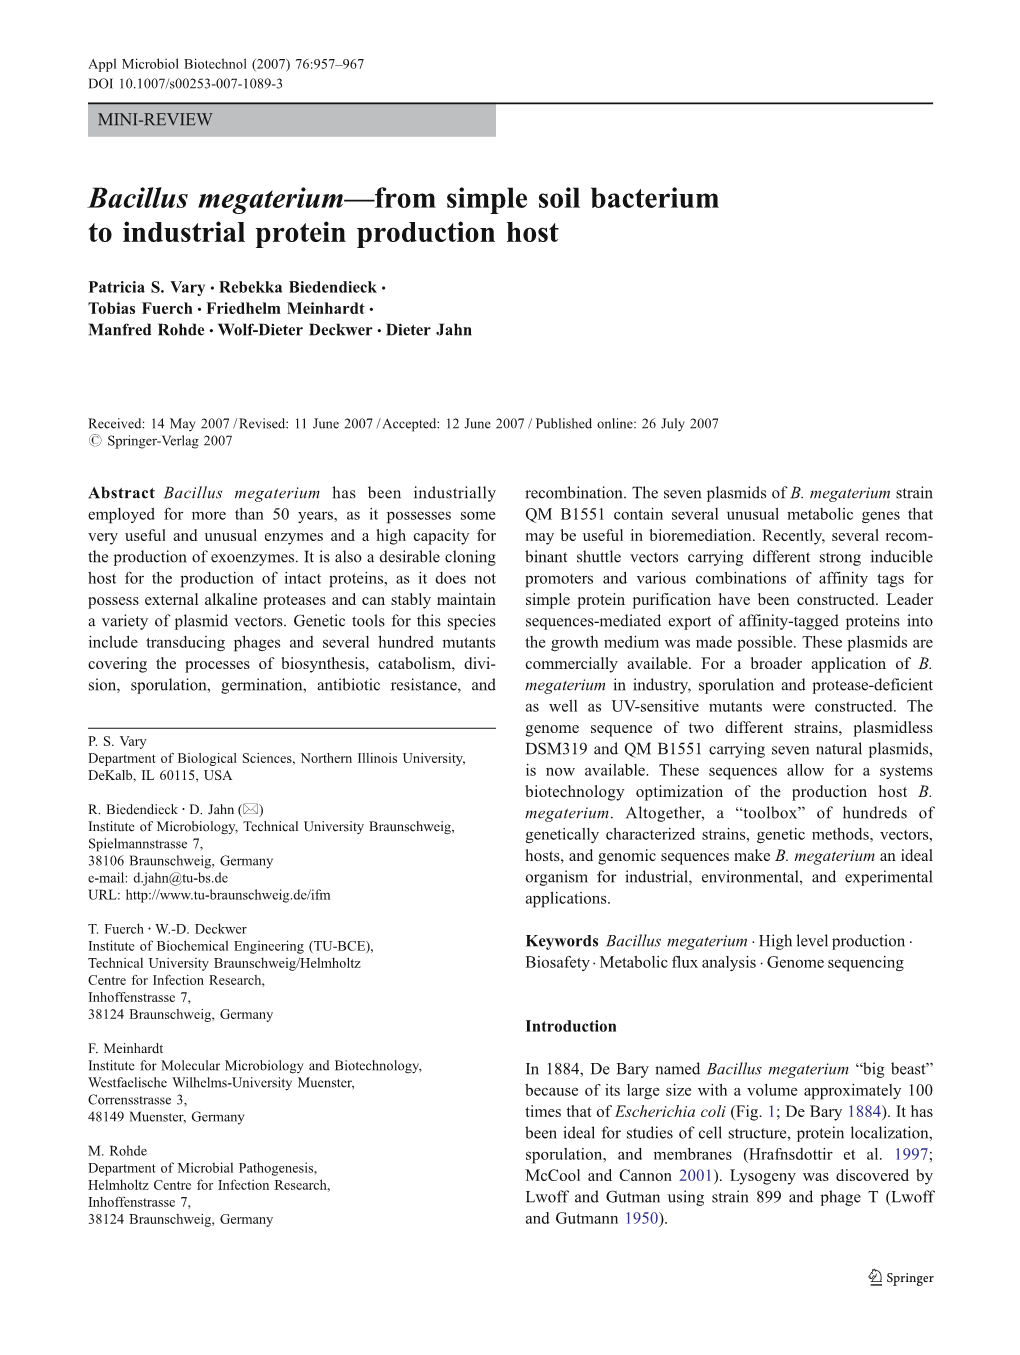 Bacillus Megaterium—From Simple Soil Bacterium to Industrial Protein Production Host